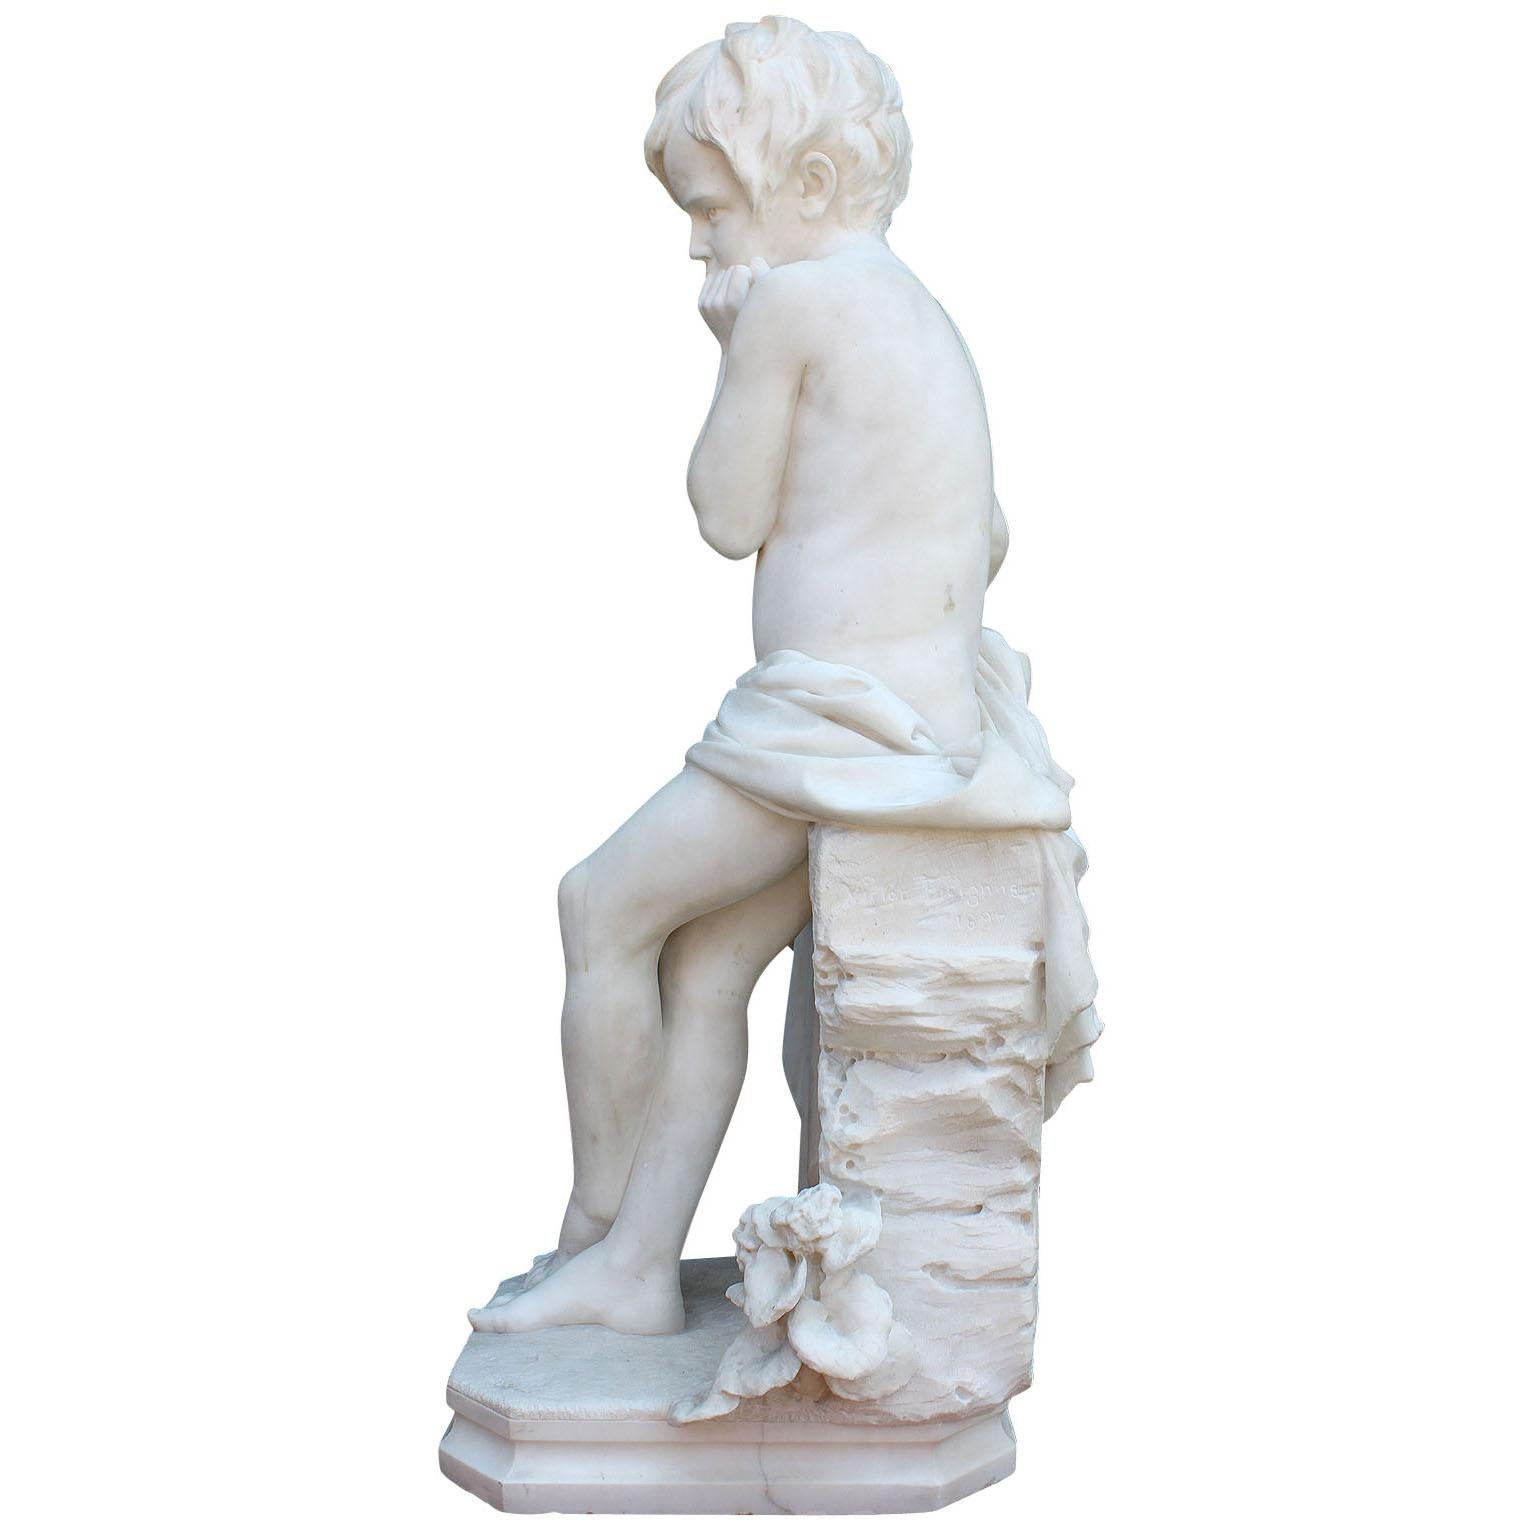 Hand-Carved Italian 19th Century Carved Carrara Marble Figure of a Young Boy with a Mandolin